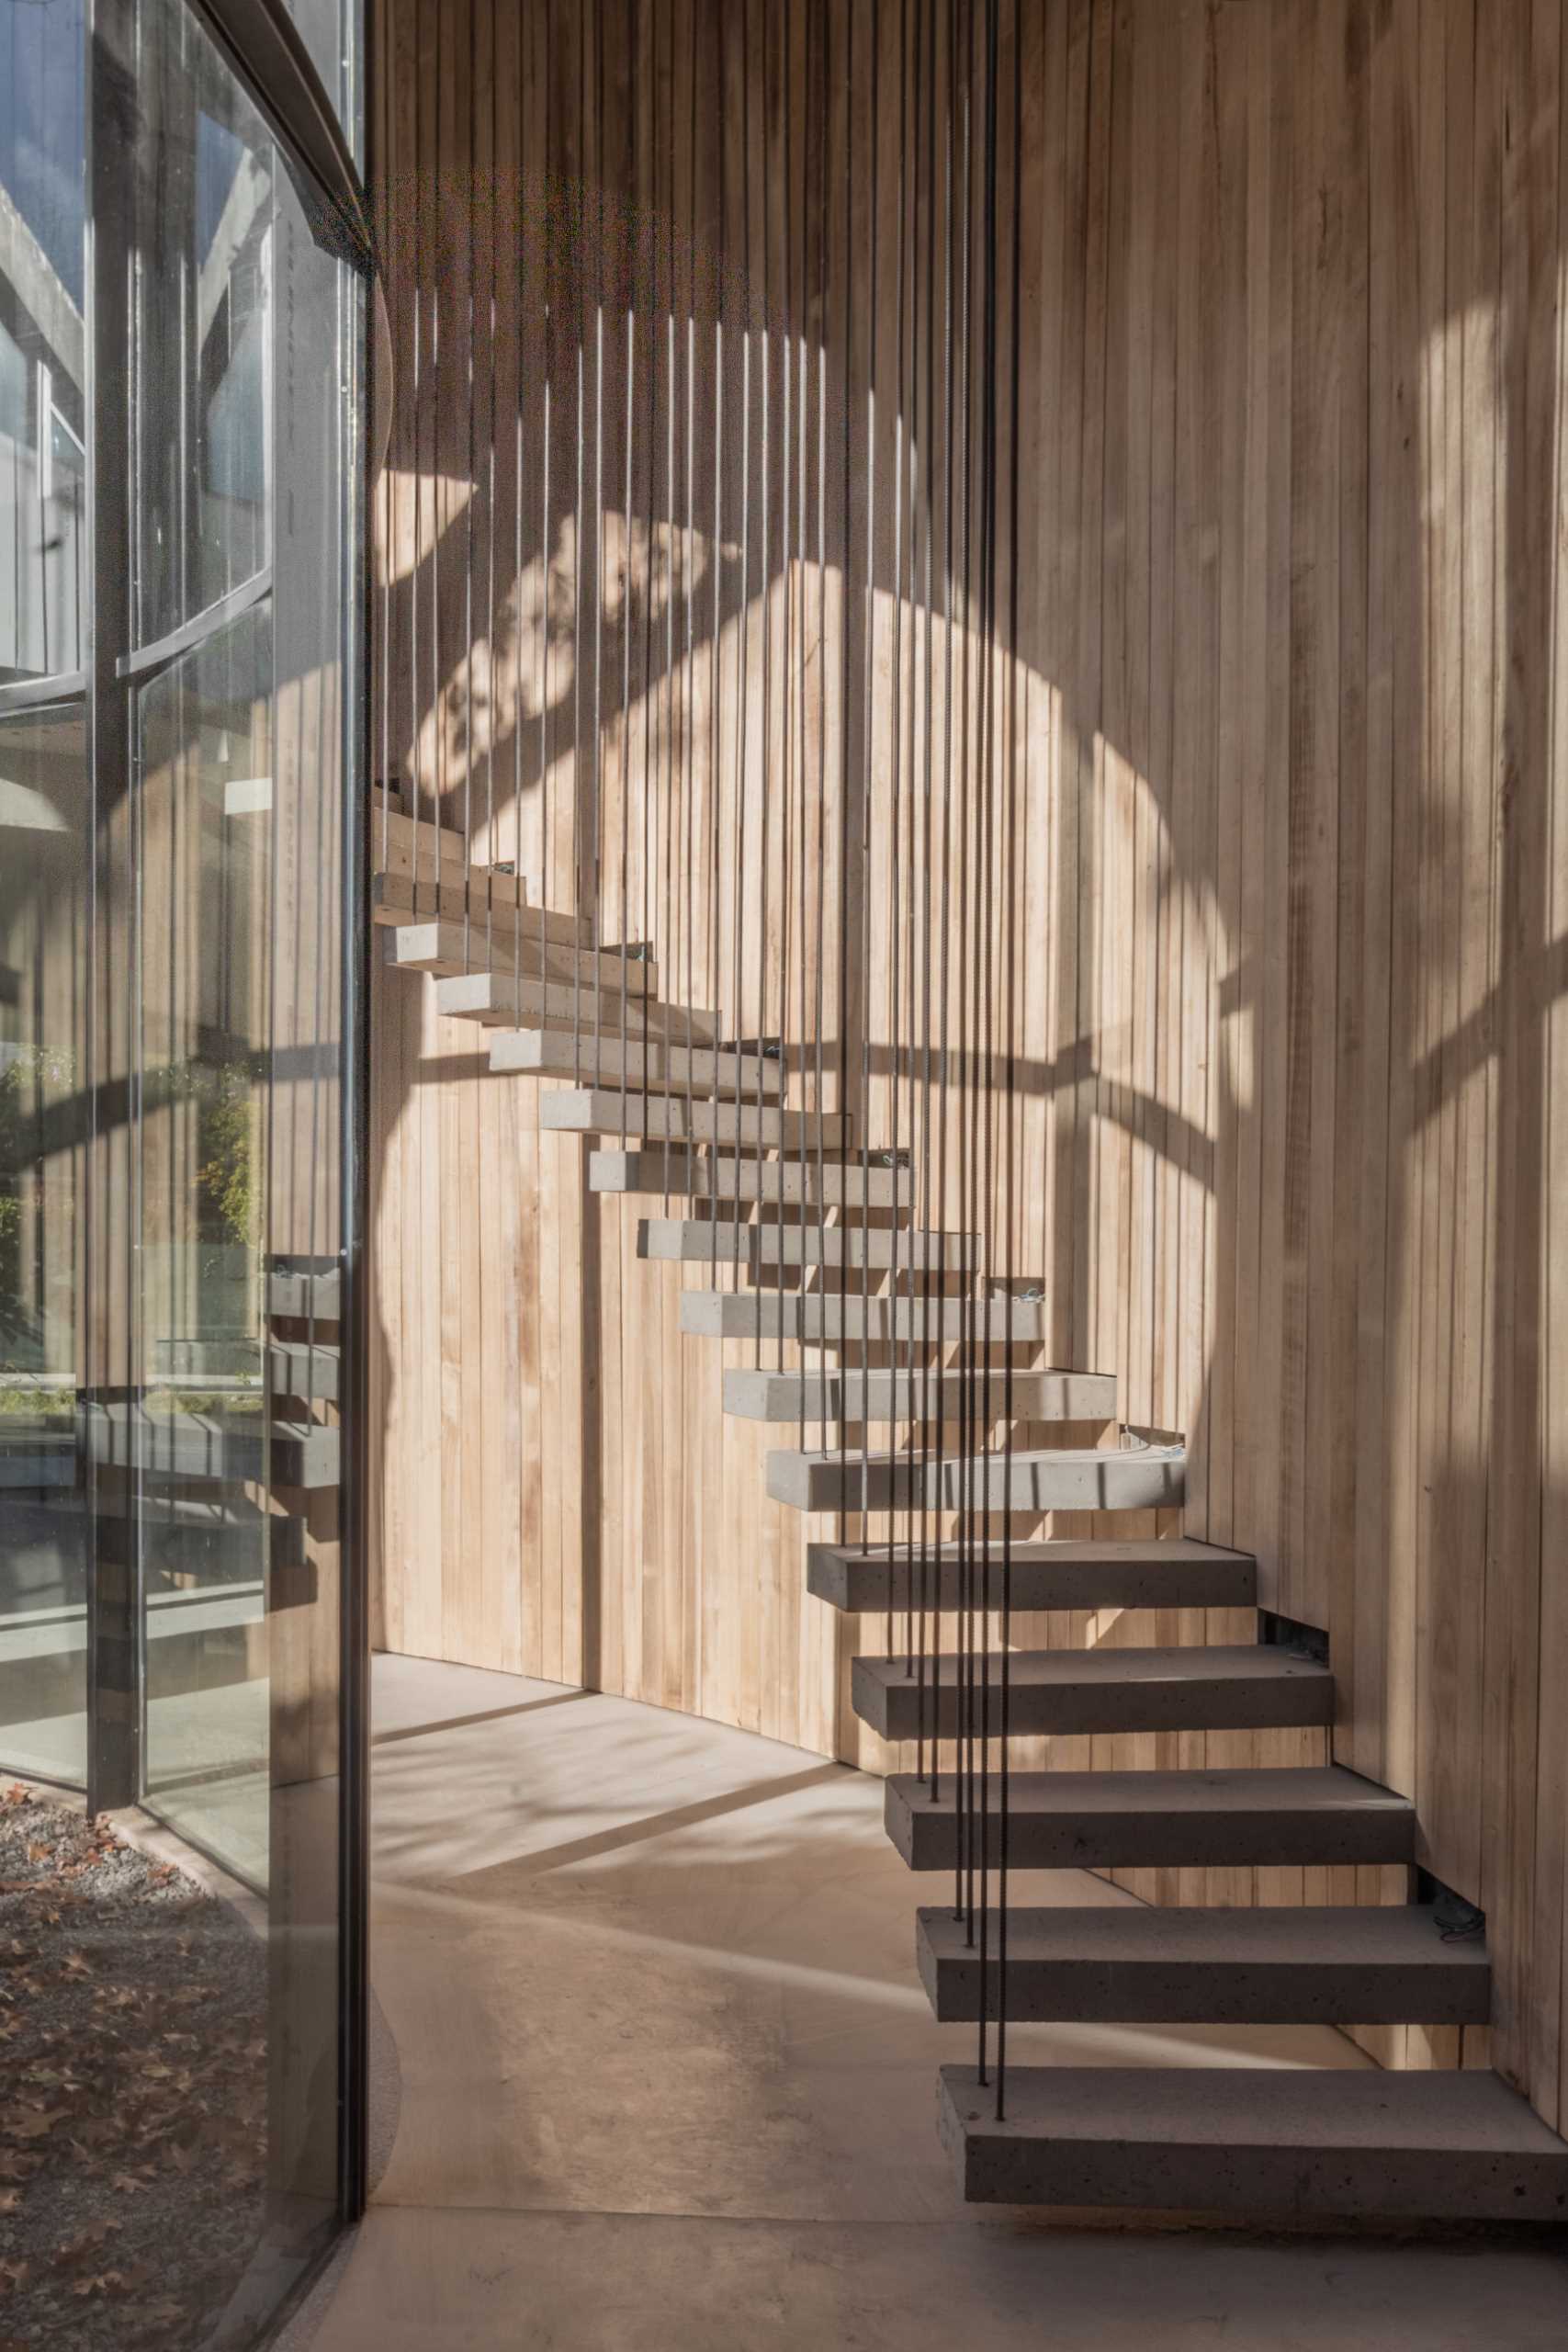 The wall of curving windows fills the ،e with an abundance of natural light, while the stairs double as a sculptural element that follows the curve.